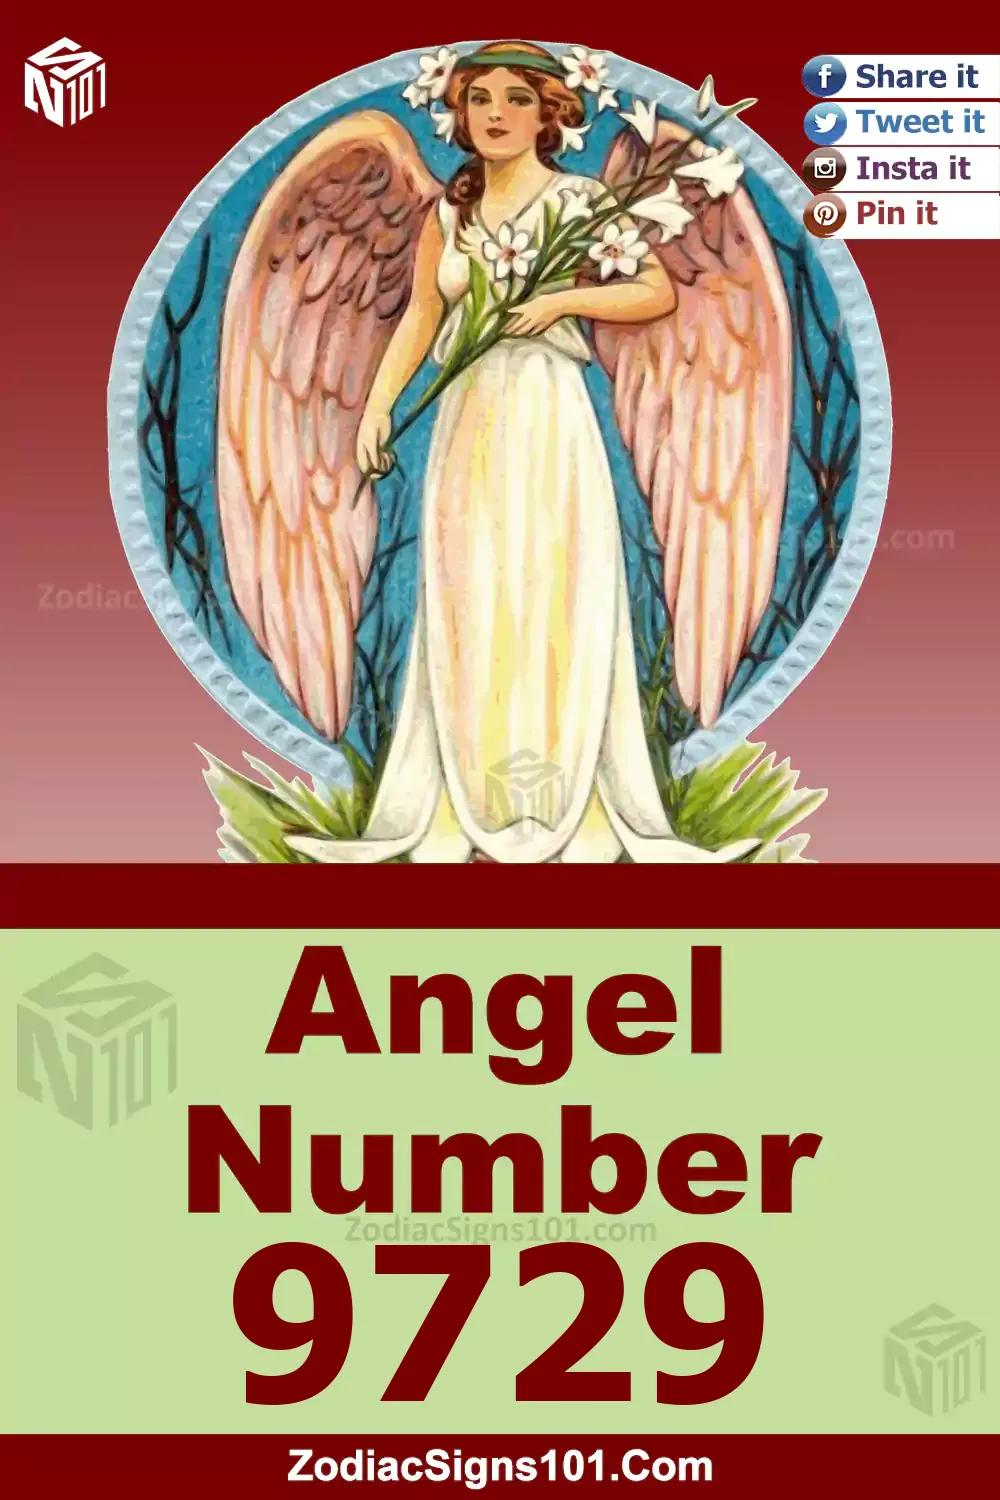 9729 Angel Number Meaning